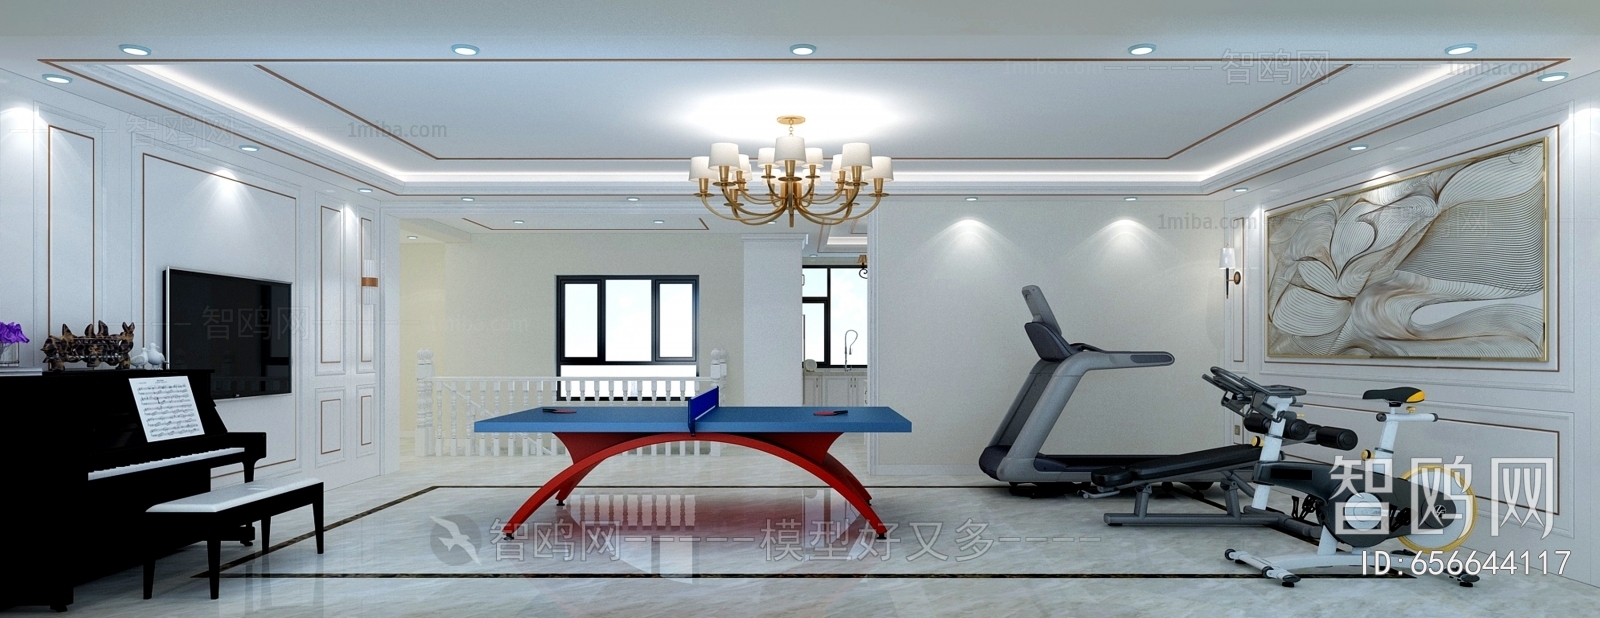 American Style Home Fitness Room